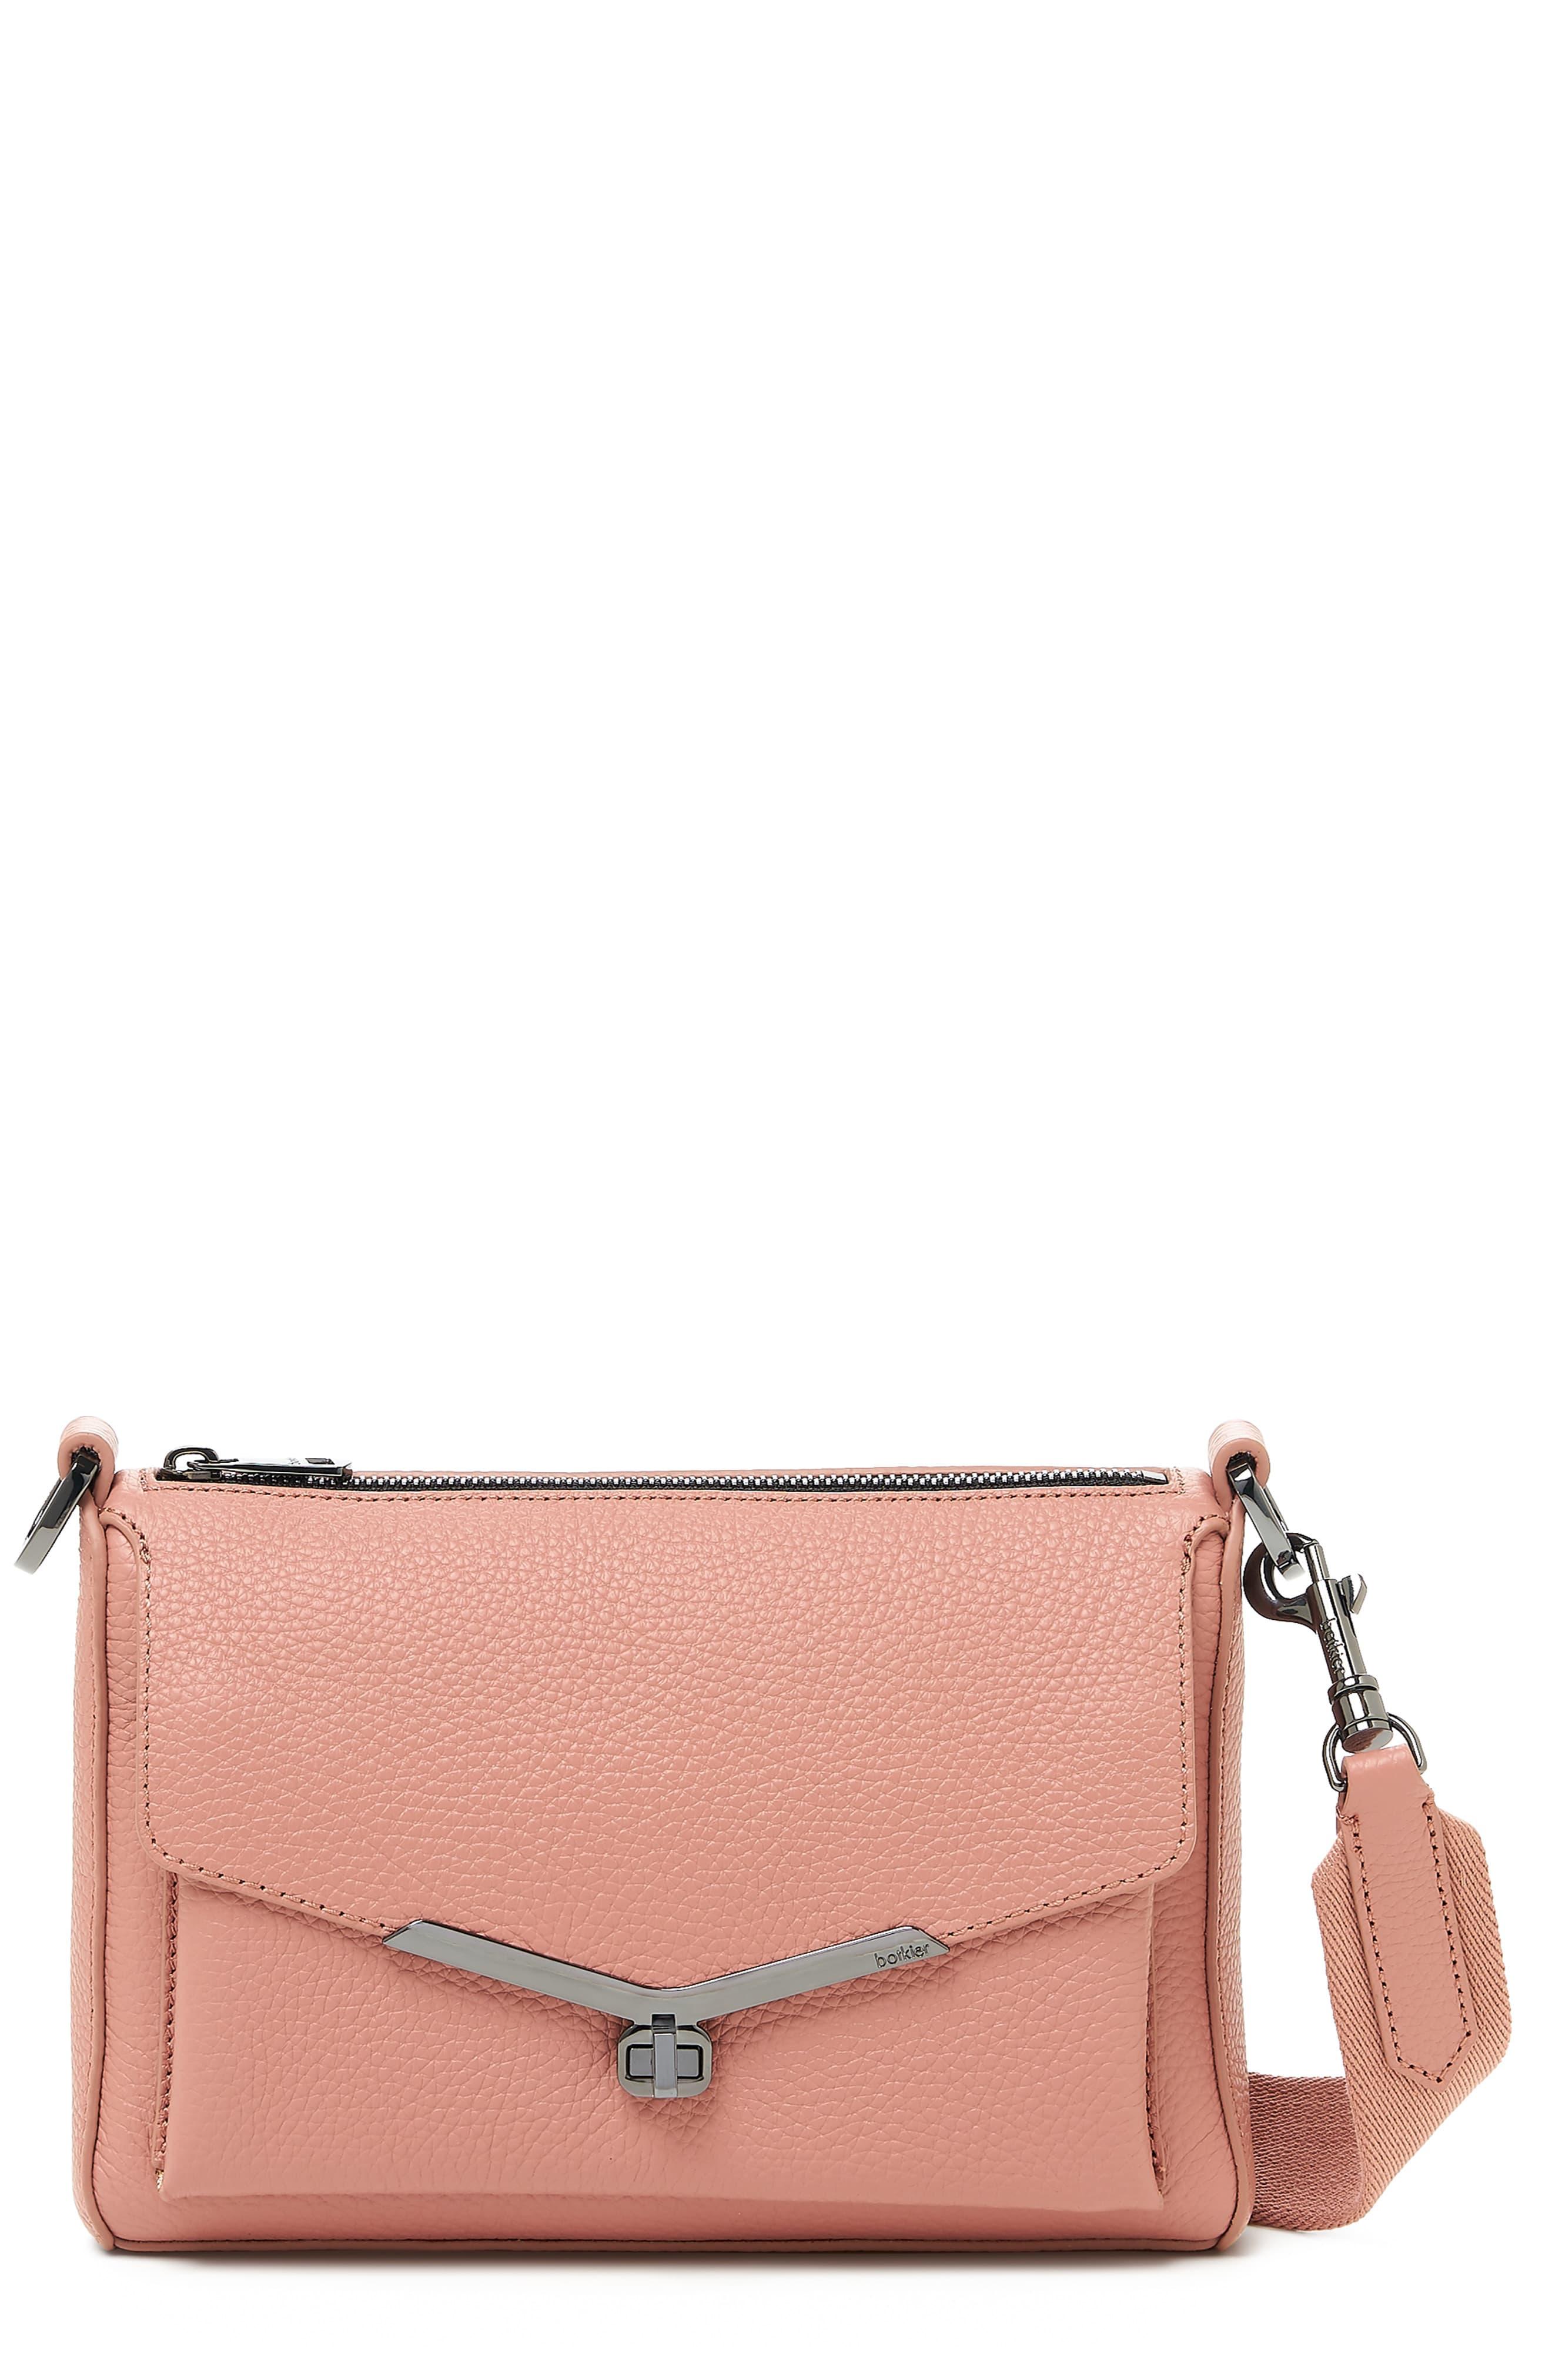 Botkier Valentina Leather Crossbody Bag in Rose (Pink) - Save 40% - Lyst